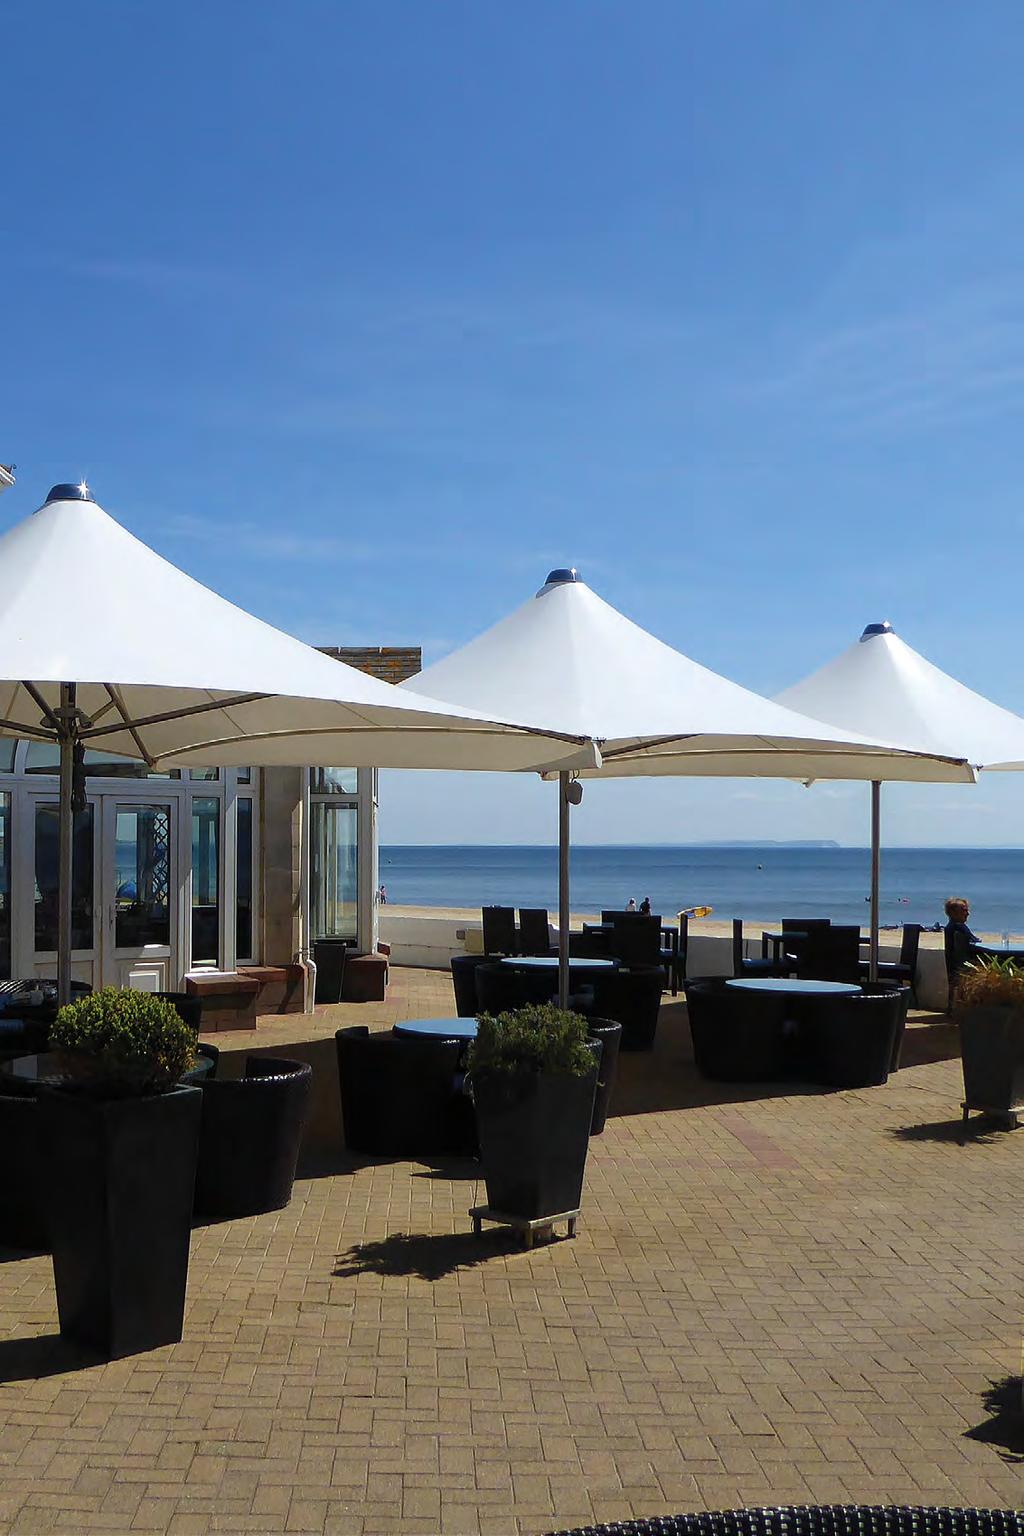 INTRODUCING VORTEX Designed for today s demanding environment and engineered to withstand high winds and driving rain over sustained periods of time, Vortex parasols are the ultimate shade and